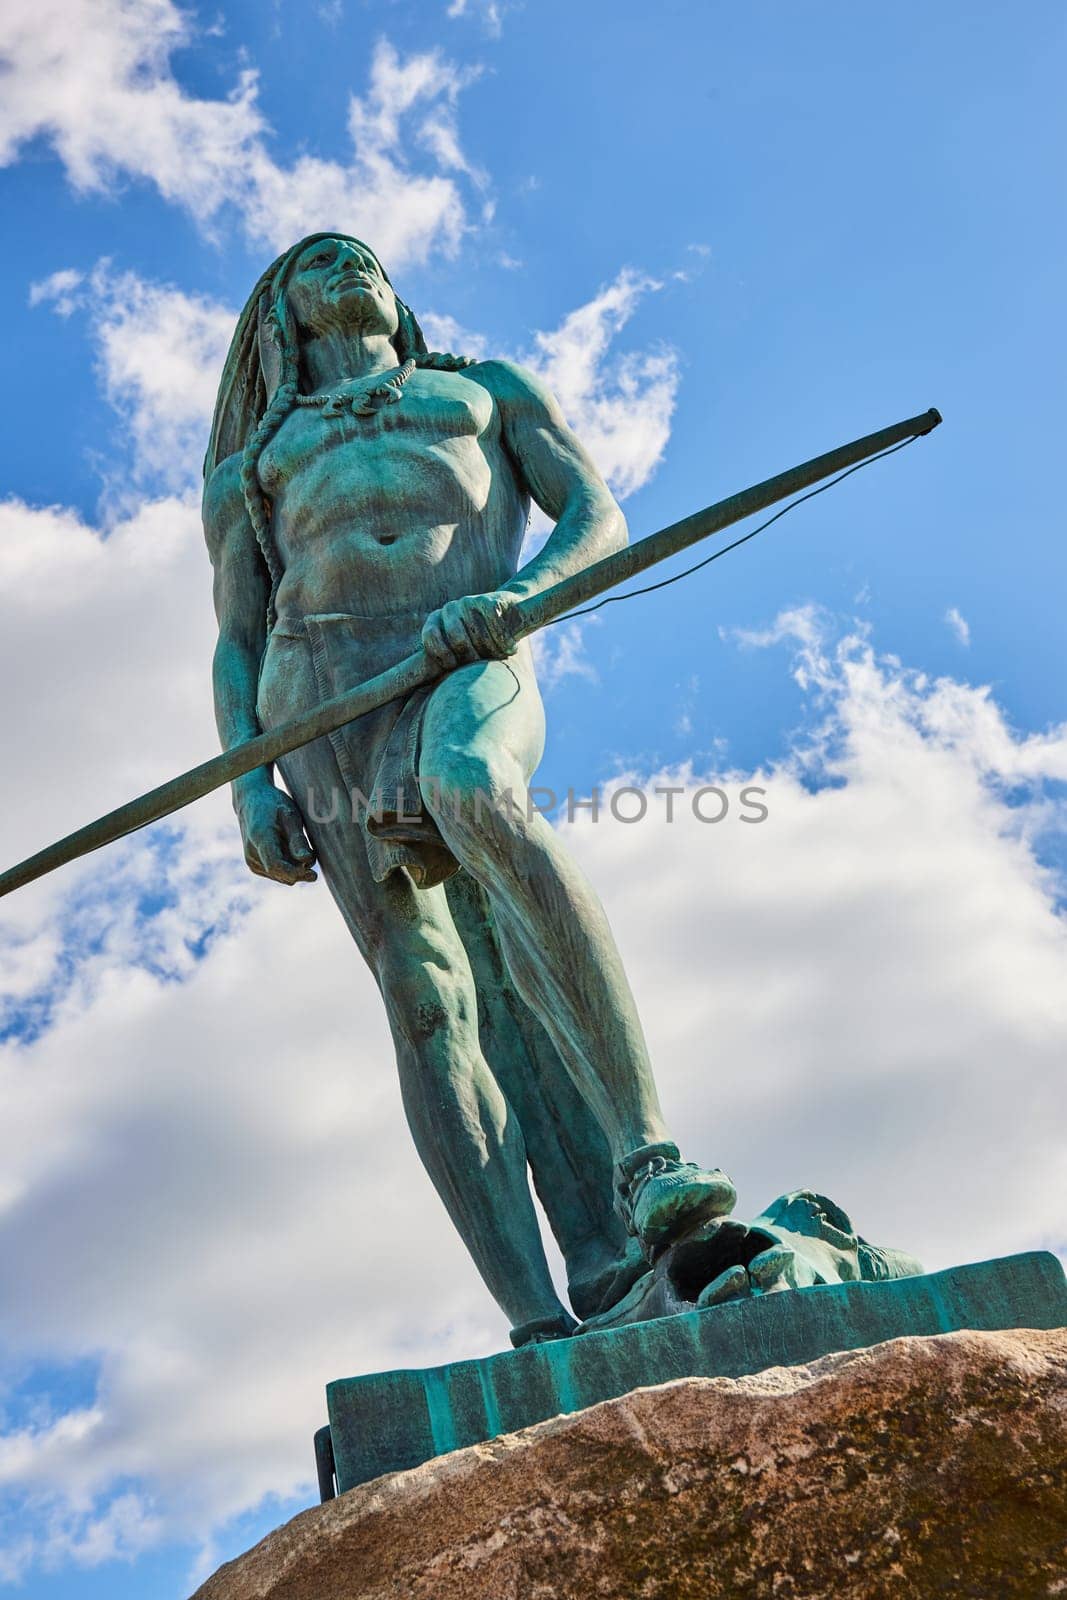 Majestic Bronze Warrior Statue with Spear Against Blue Sky by njproductions